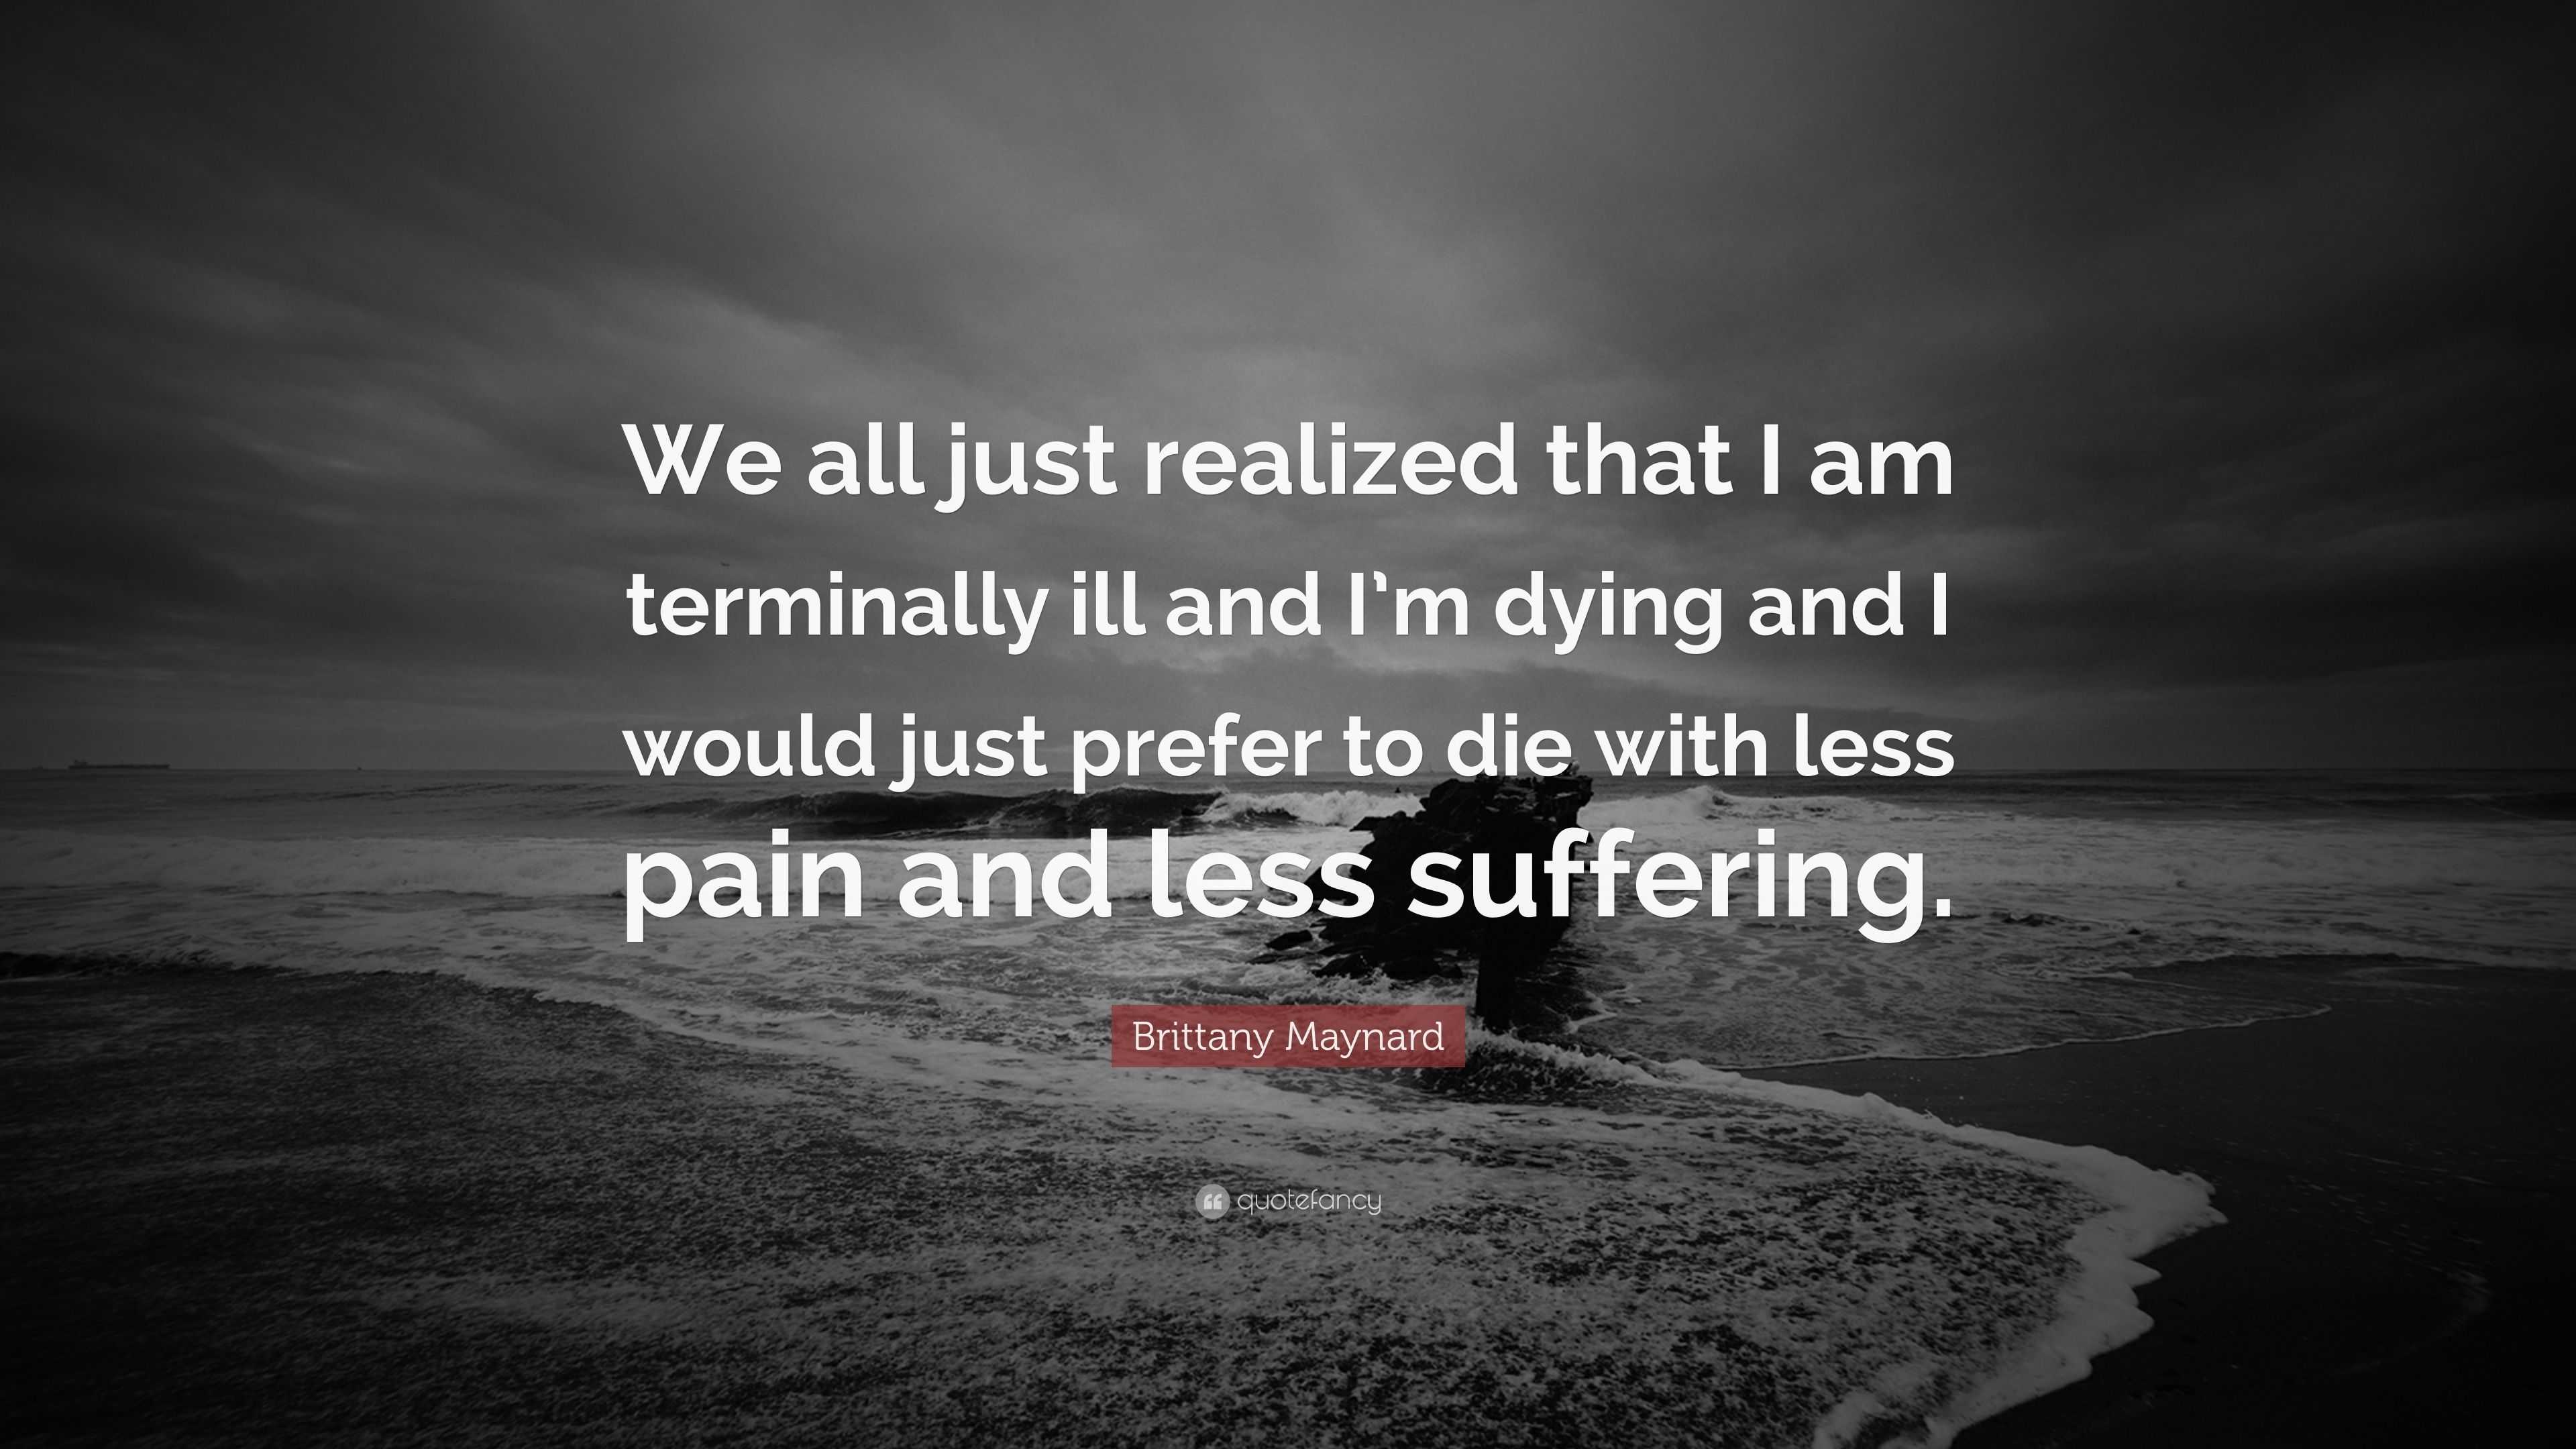 christian quotes for the terminally ill